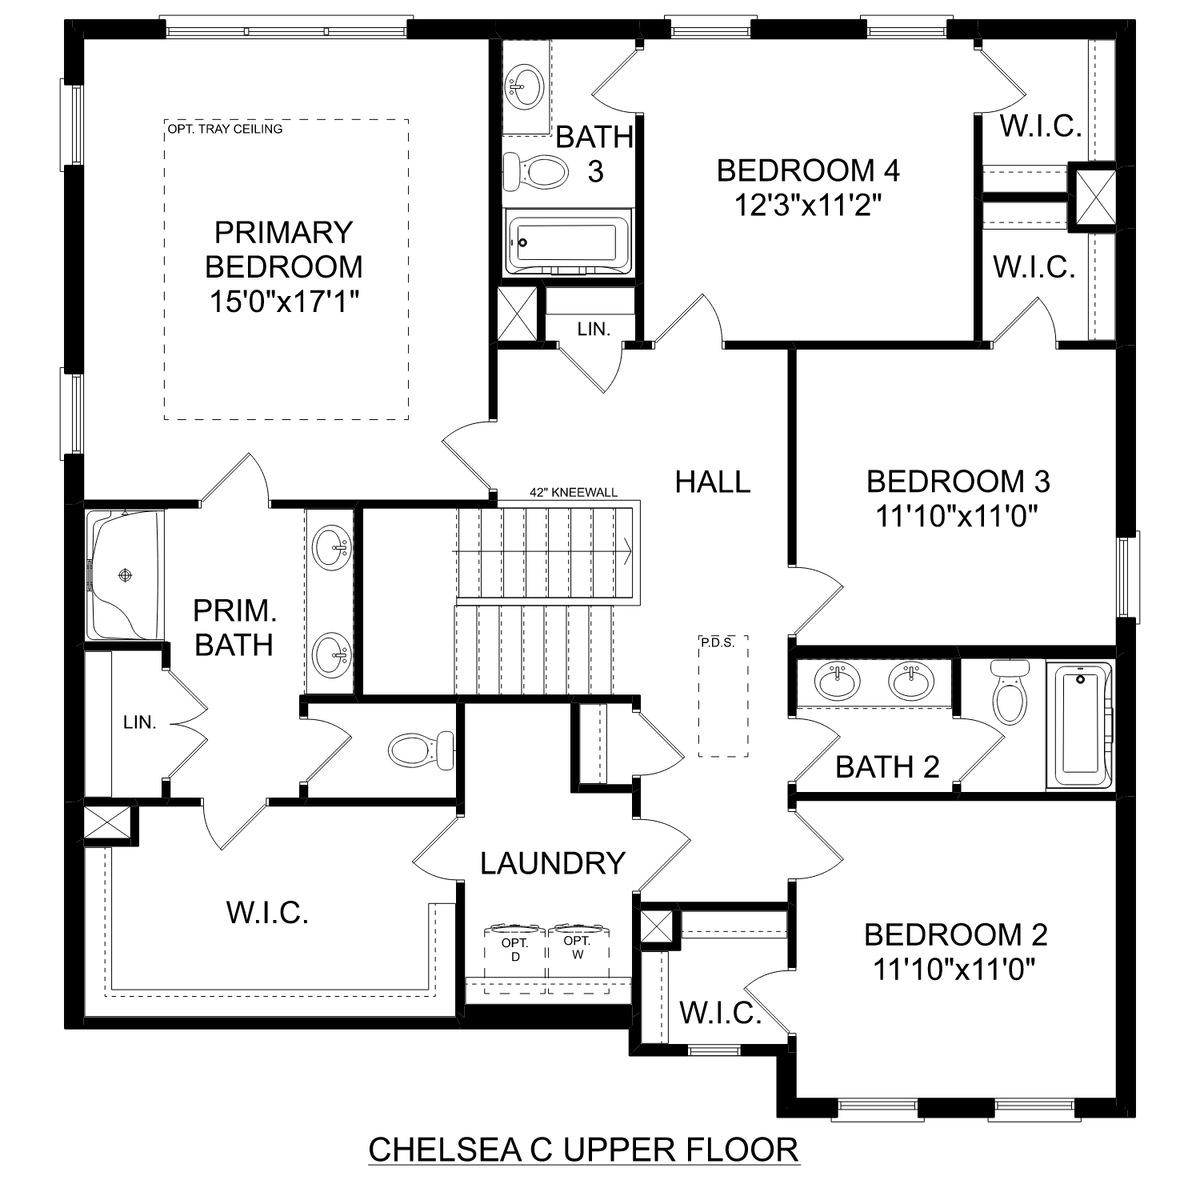 2 - The Chelsea C buildable floor plan layout in Davidson Homes' Flint Meadows community.